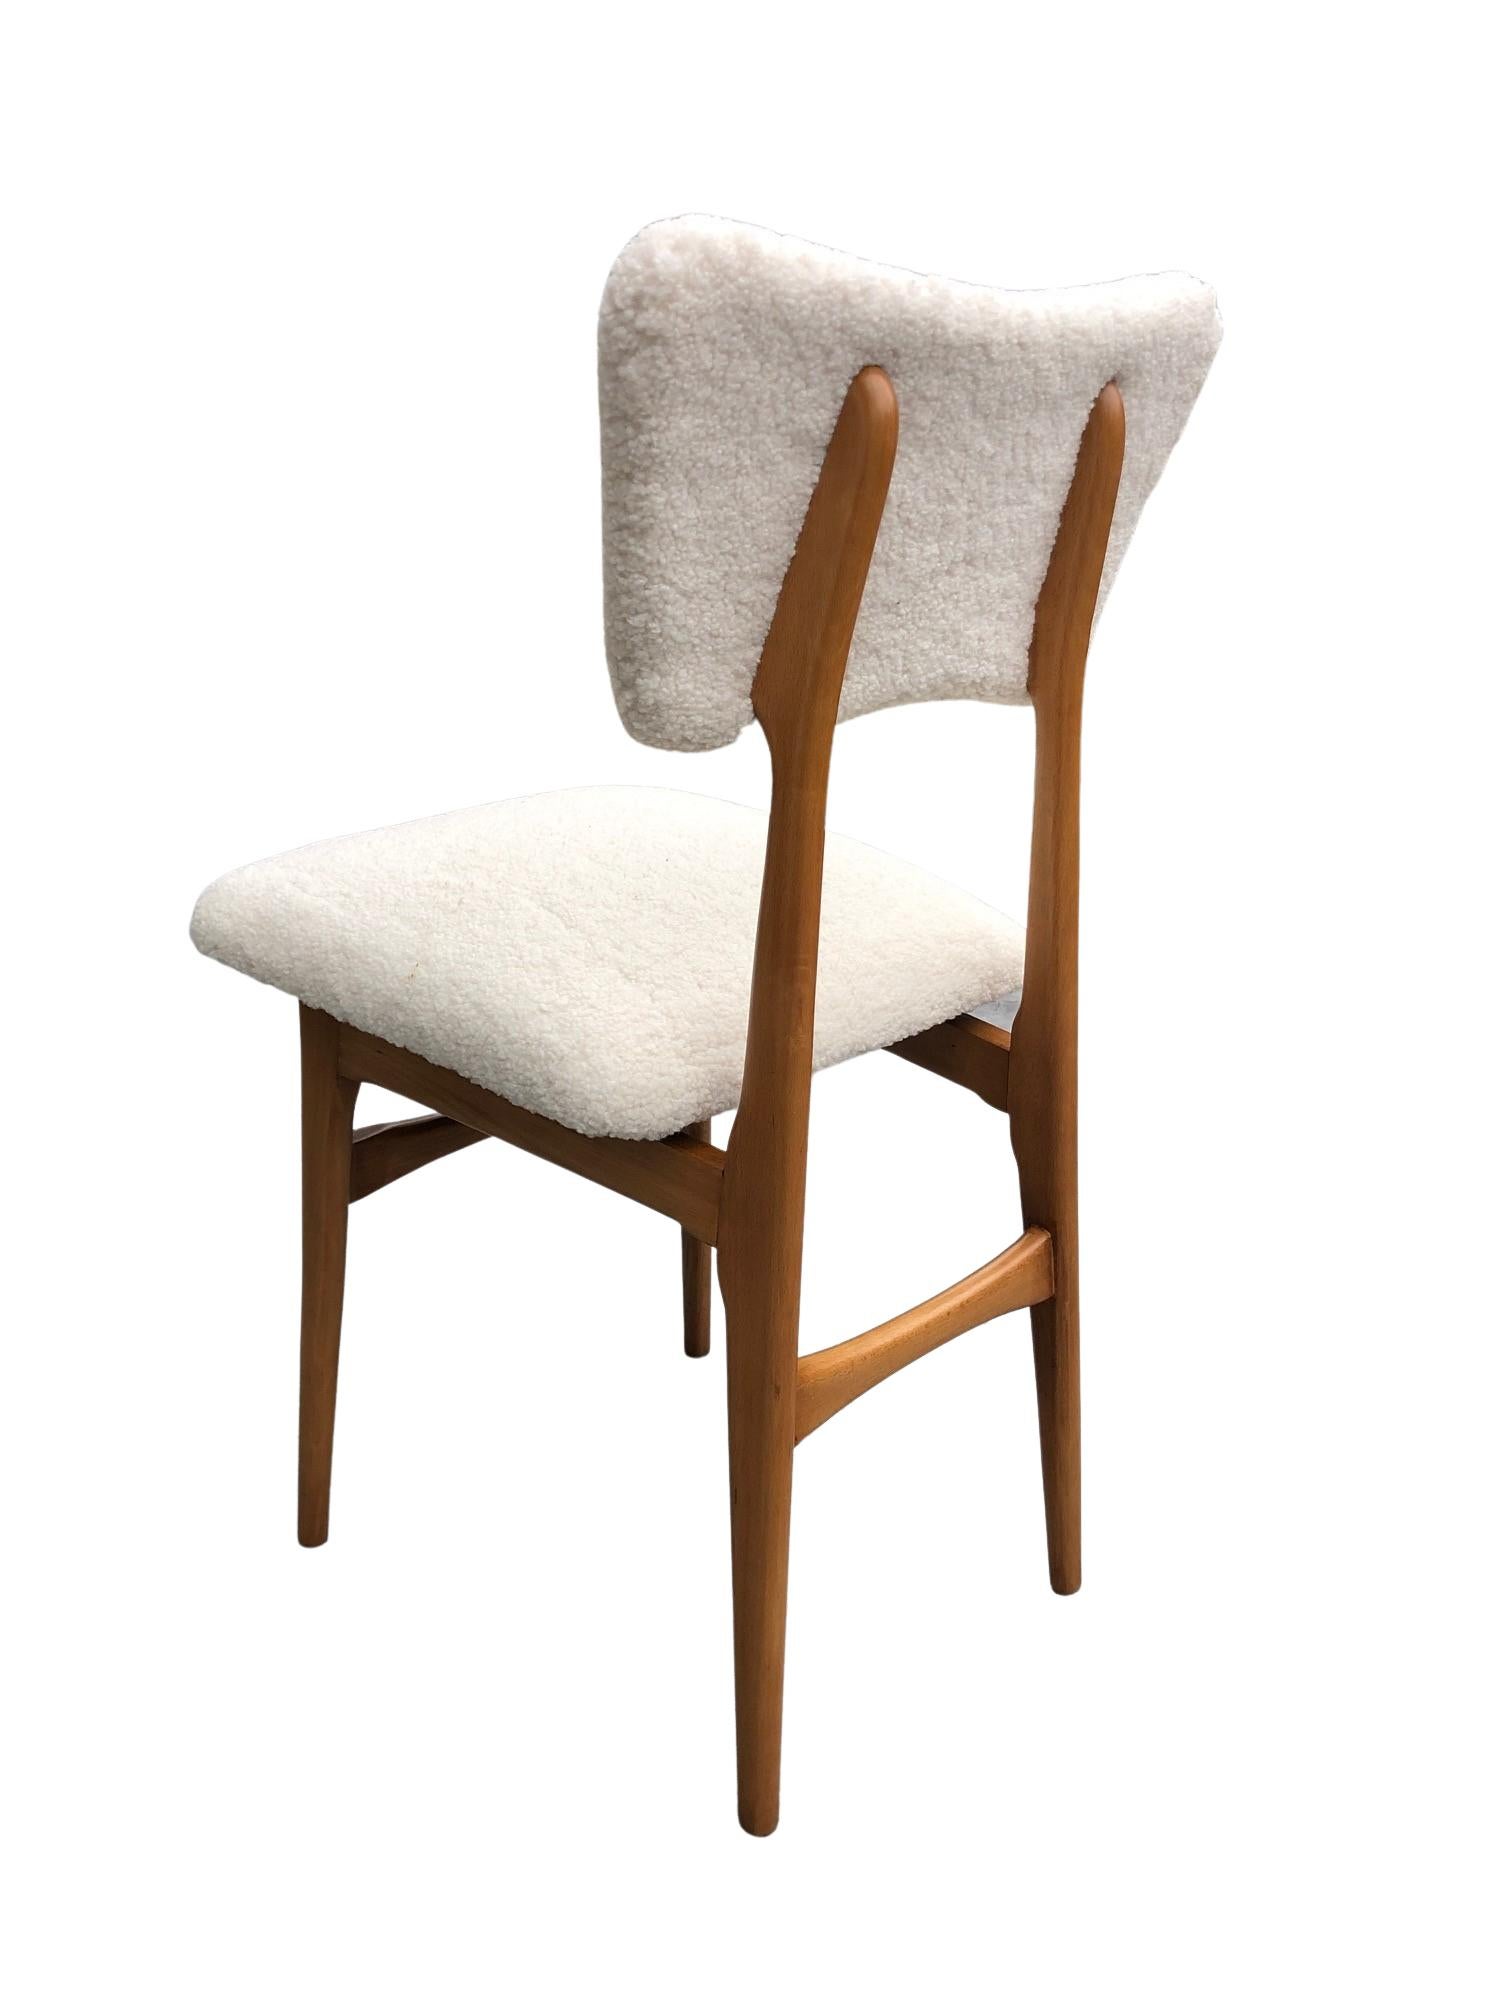 20th Century Midcentury Cream Bouclé and Wood Dining Chairs, Europe, 1960s, Set of Four For Sale